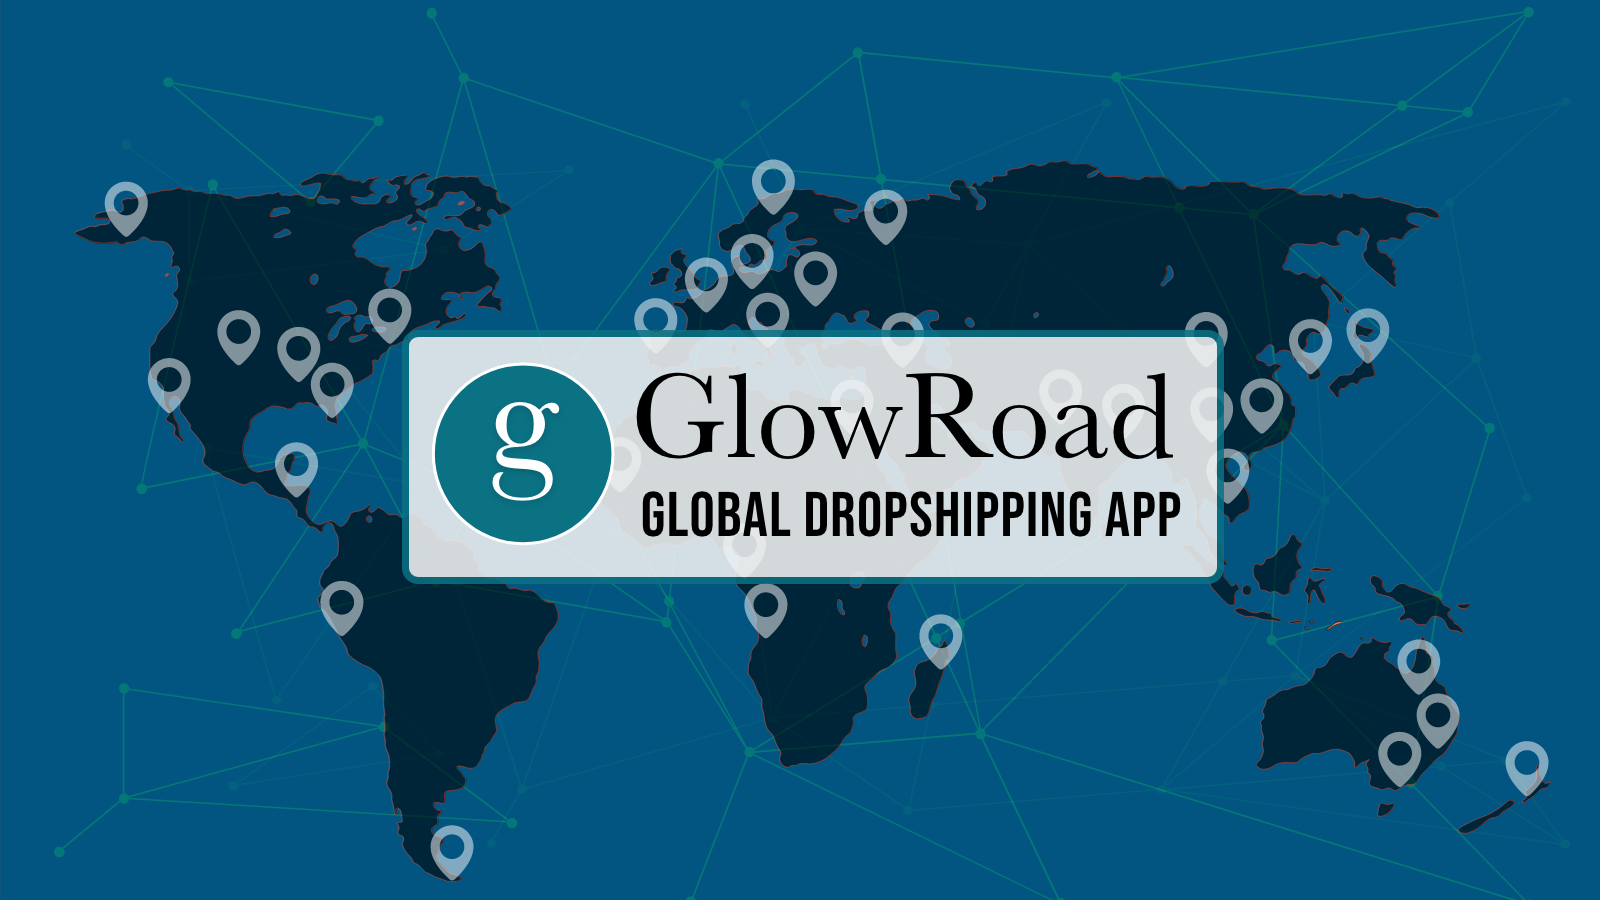 GlowRoad Dropshipping FREE App - Express delivery within India ...